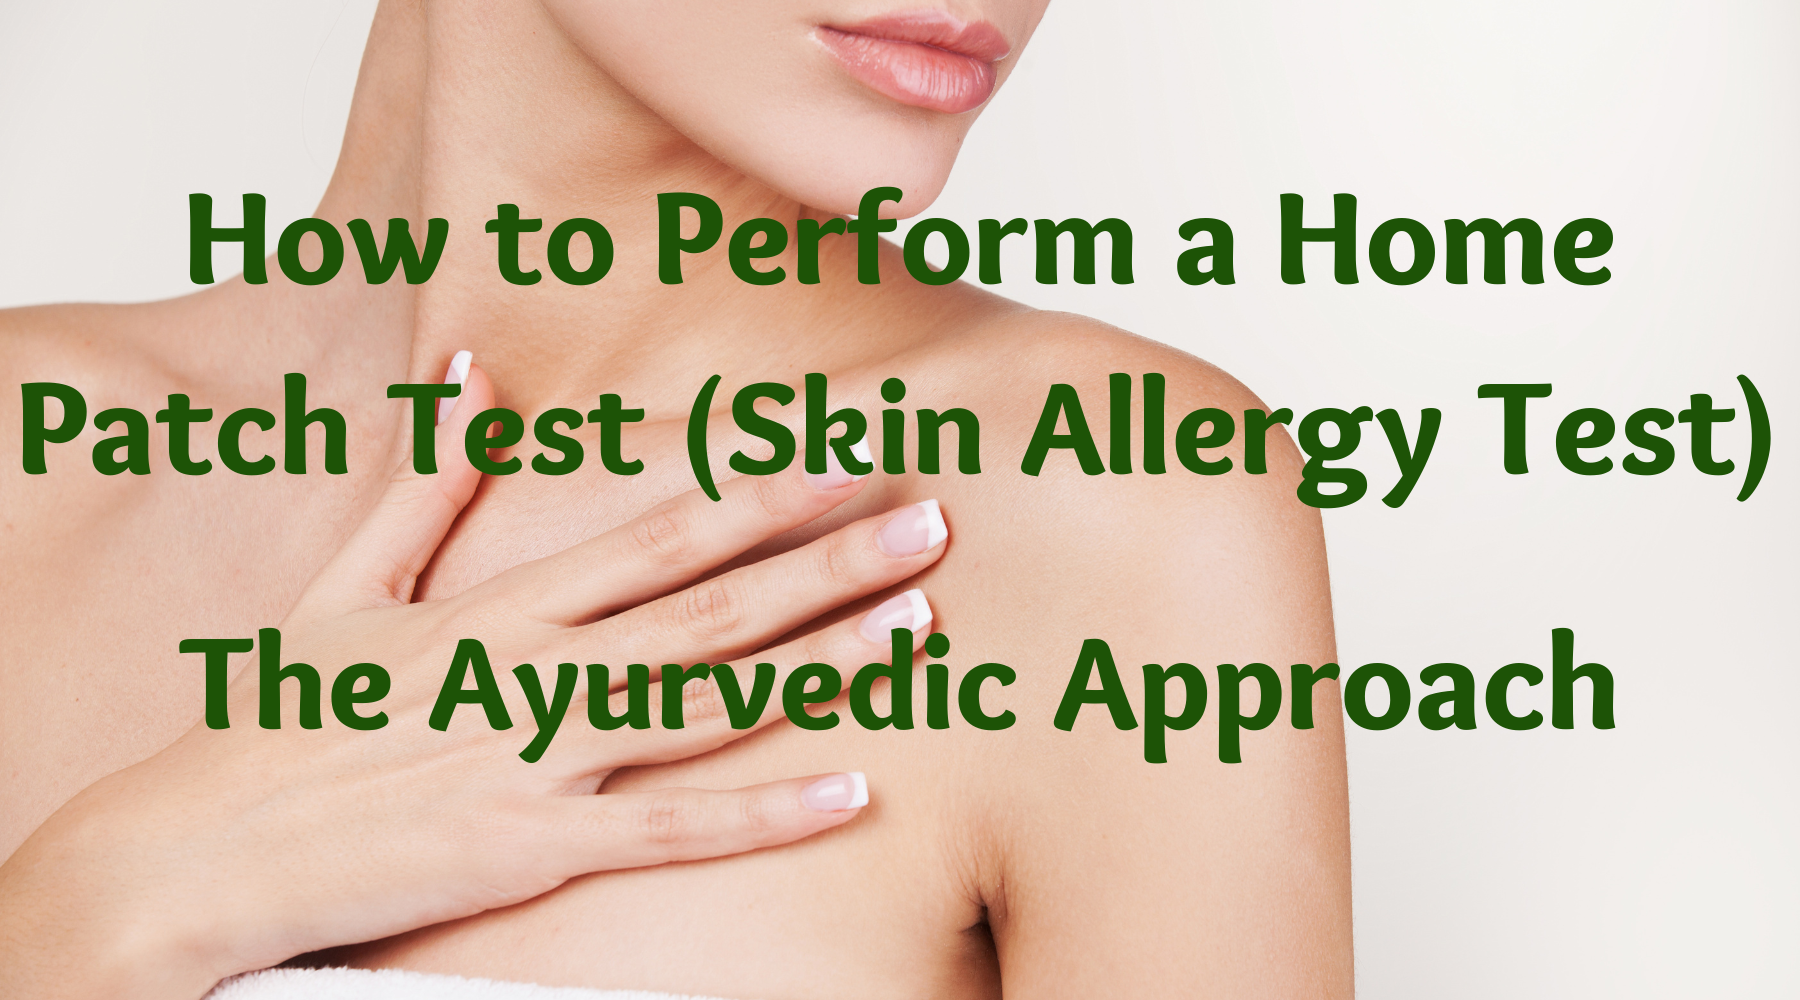 How to Perform a Home Patch Test (Skin Allergy Test)